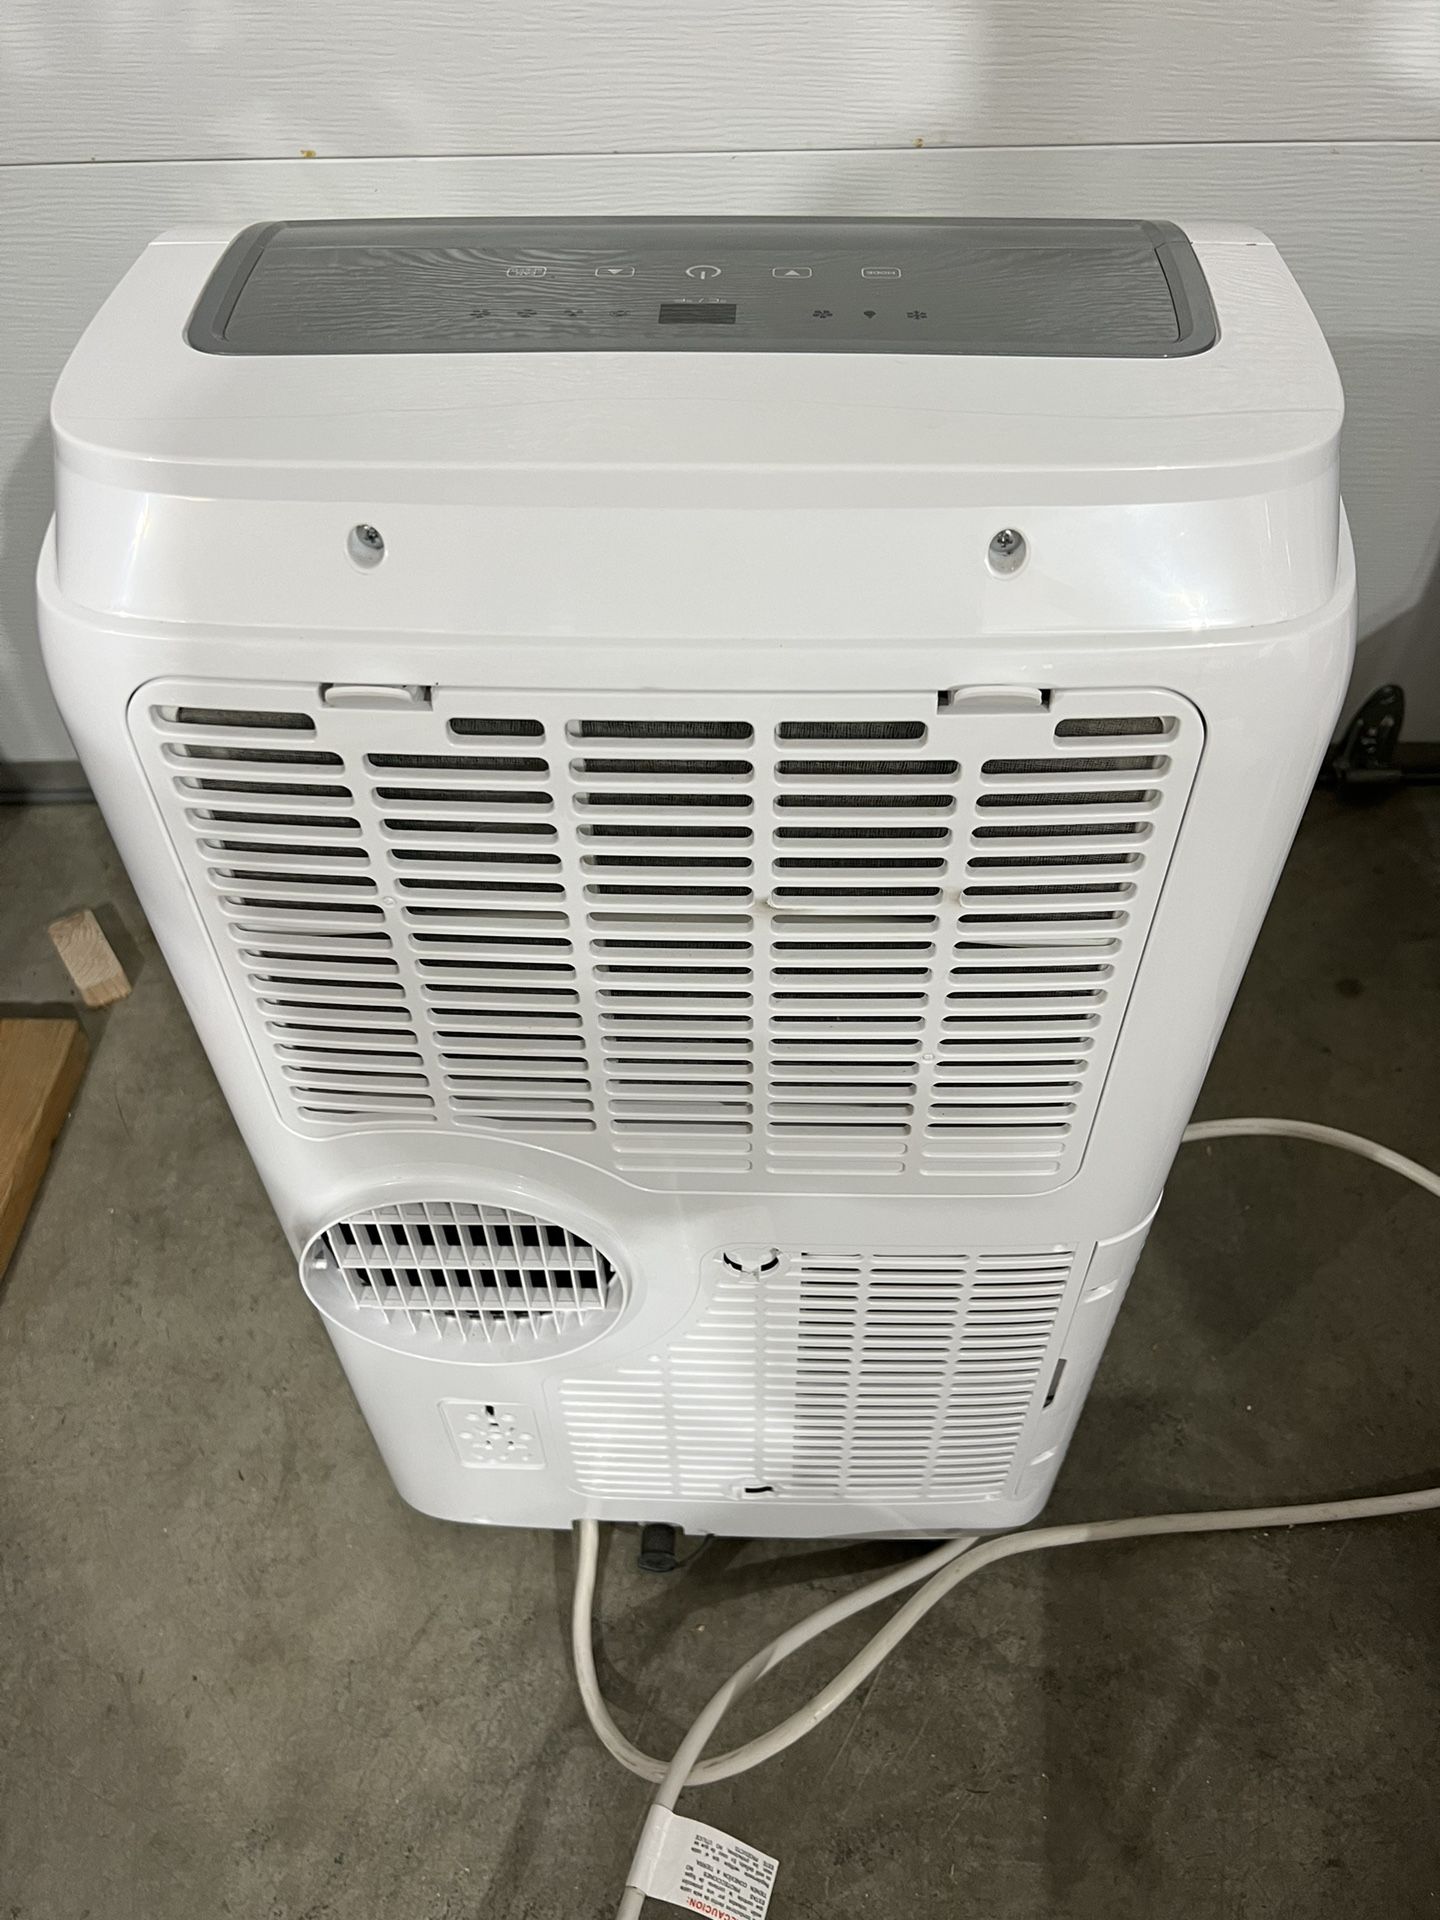 BLACK+DECKER BPACT12WT Large Spaces Portable Air Conditioner, 12,000 BTU,  White for Sale in Fresno, CA - OfferUp